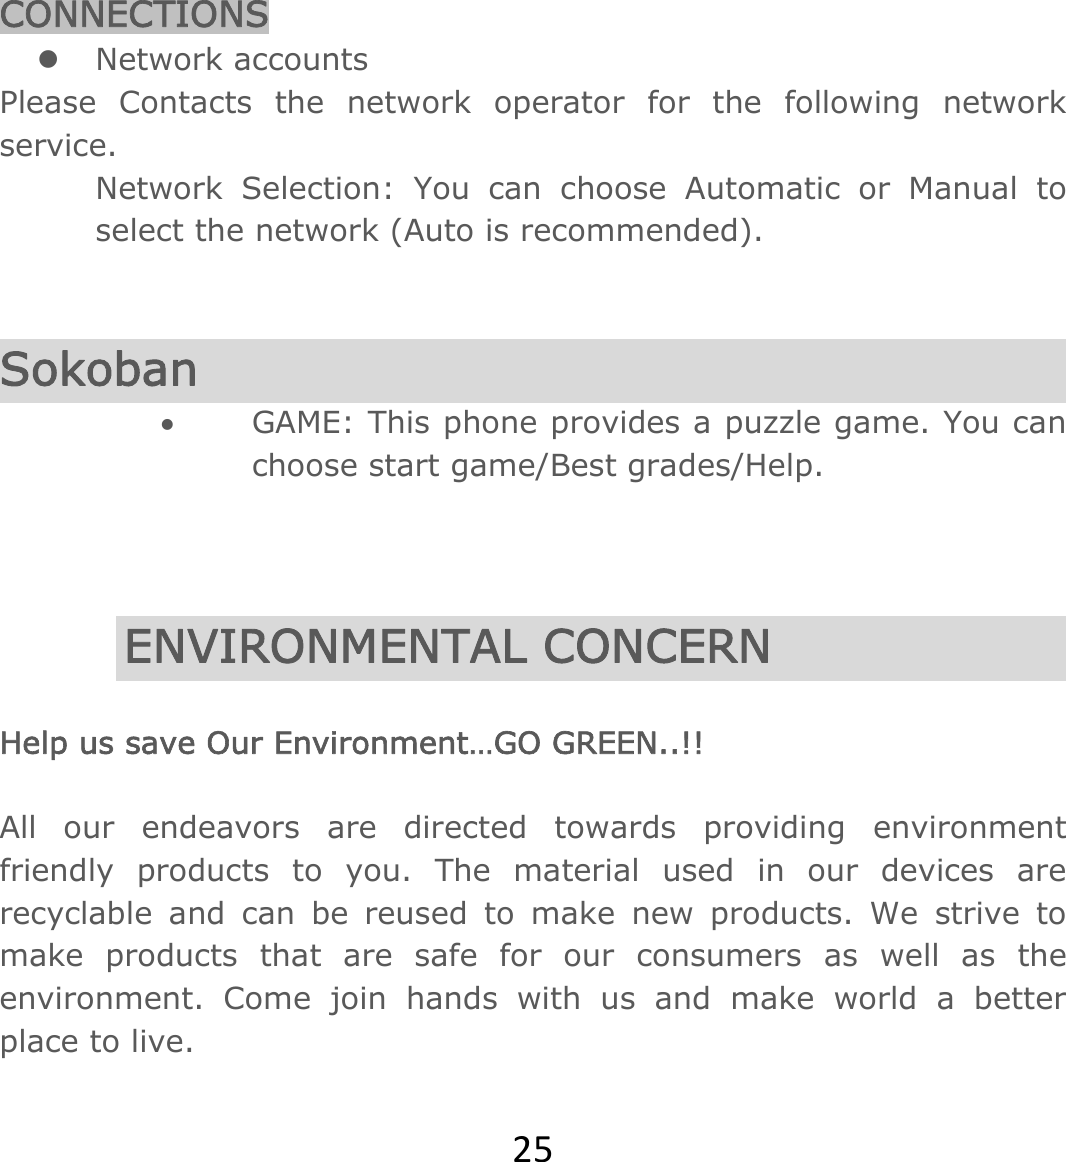 25CONNECTIONS z Network accounts Please Contacts the network operator for the following network service. Network Selection: You can choose Automatic or Manual to select the network (Auto is recommended).    Sokoban • GAME: This phone provides a puzzle game. You can choose start game/Best grades/Help.    ENVIRONMENTAL CONCERN  Help us save Our Environment…GO GREEN..!!  All our endeavors are directed towards providing environment friendly products to you. The material used in our devices are recyclable and can be reused to make new products. We strive to make products that are safe for our consumers as well as the environment. Come join hands with us and make world a better place to live.  